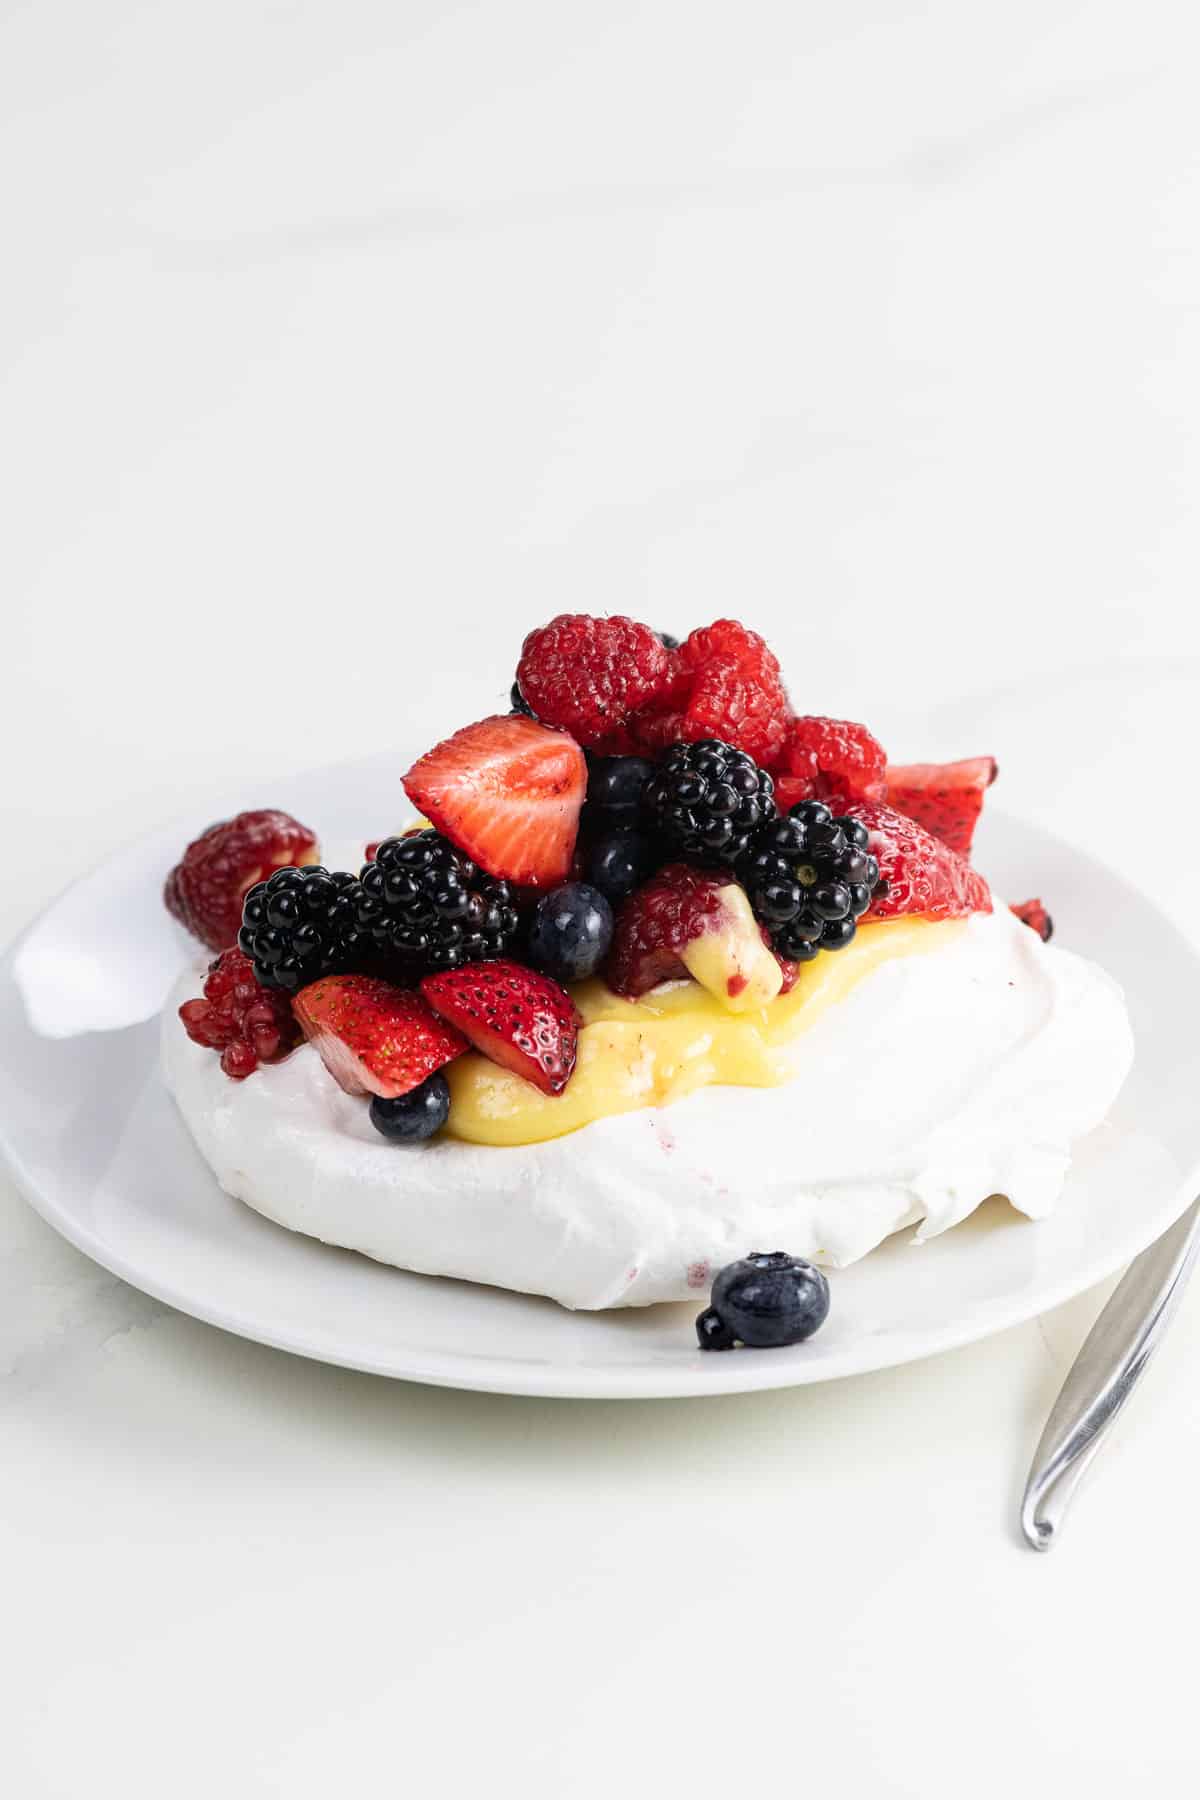 pavlova with lemon curd and berries on a plate with a fork